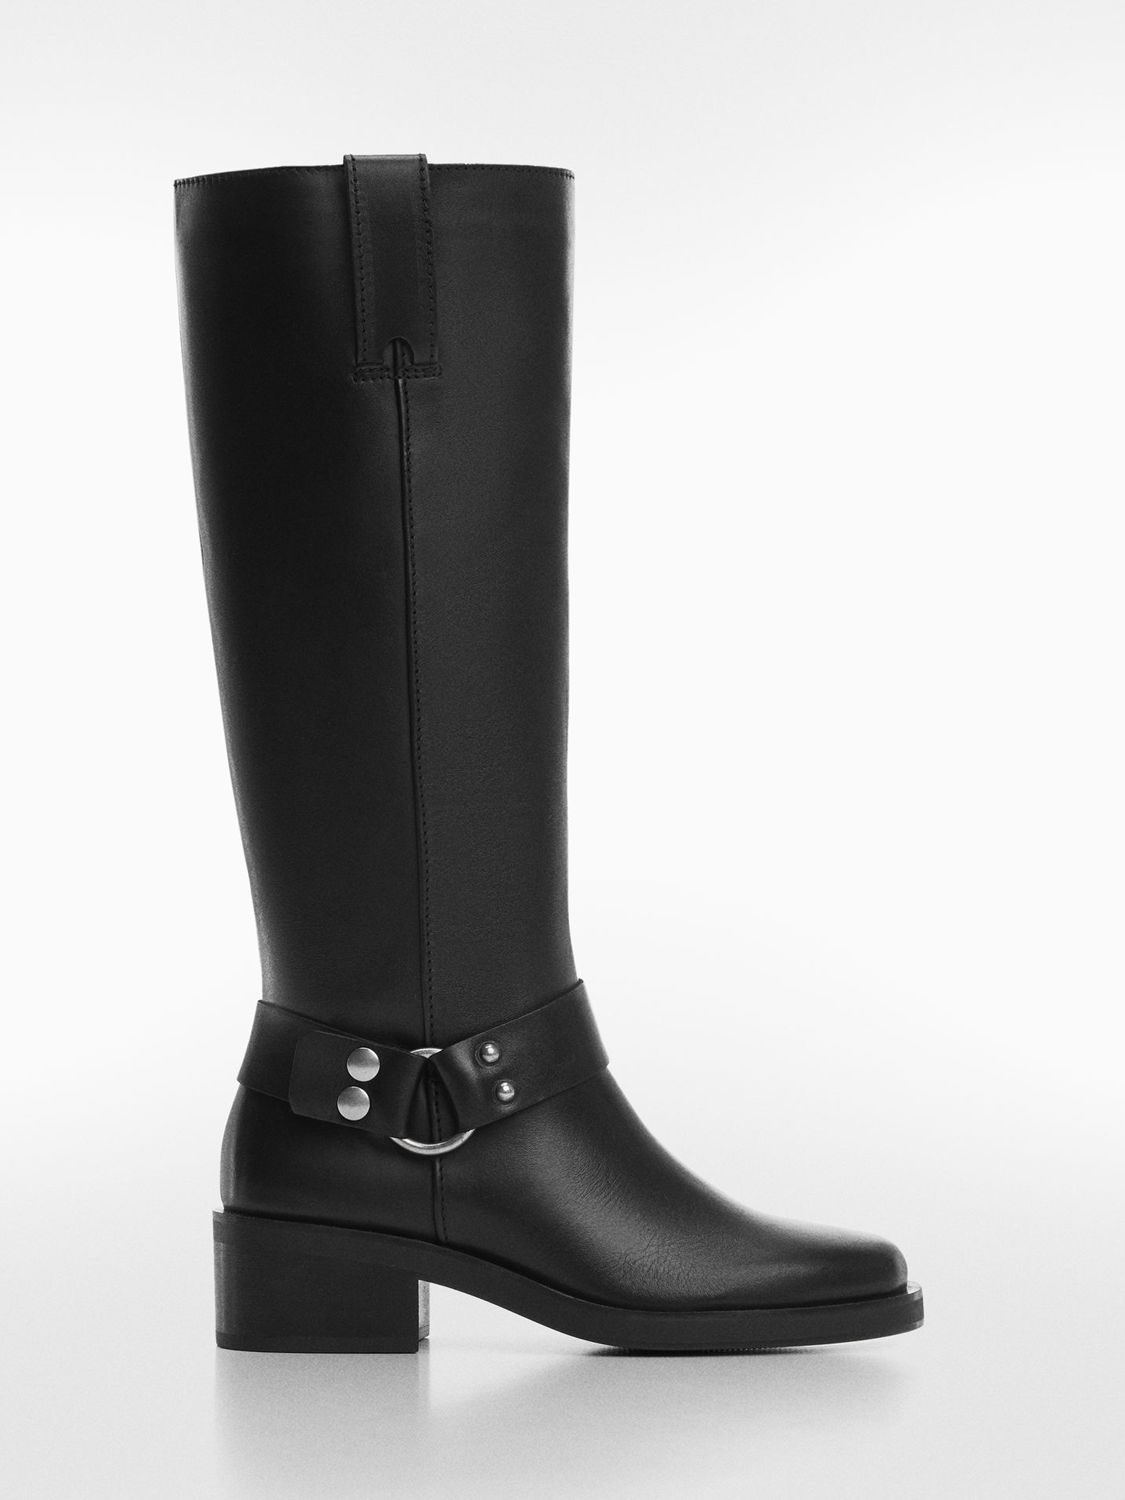 Mango Sonar Leather Buckle Boots, Black at John Lewis & Partners